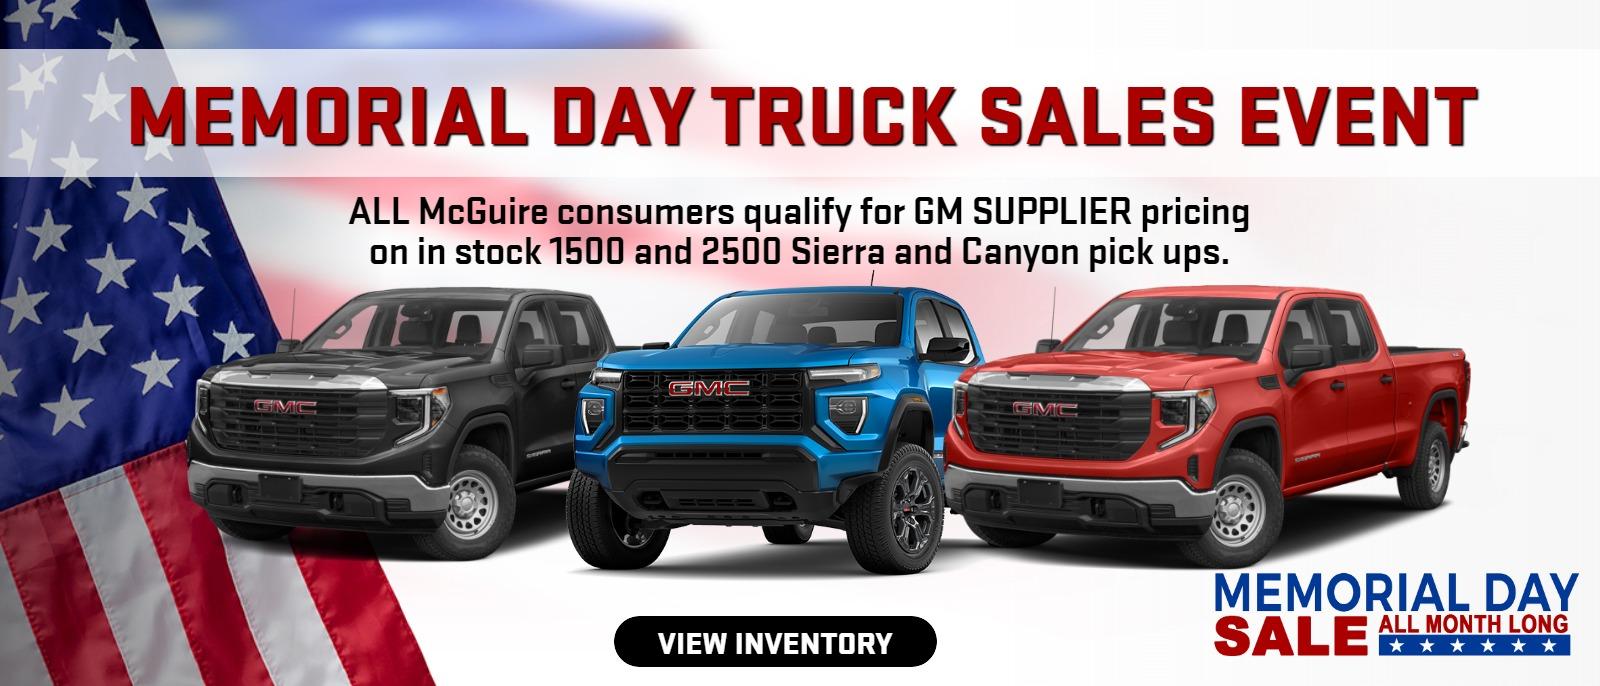 Memorial Day TRUCK SALES EVENT

ALL McGuire consumers qualify for GM SUPPLIER pricing
on in stock 1500 and 2500 Sierra and Canyon pick ups.